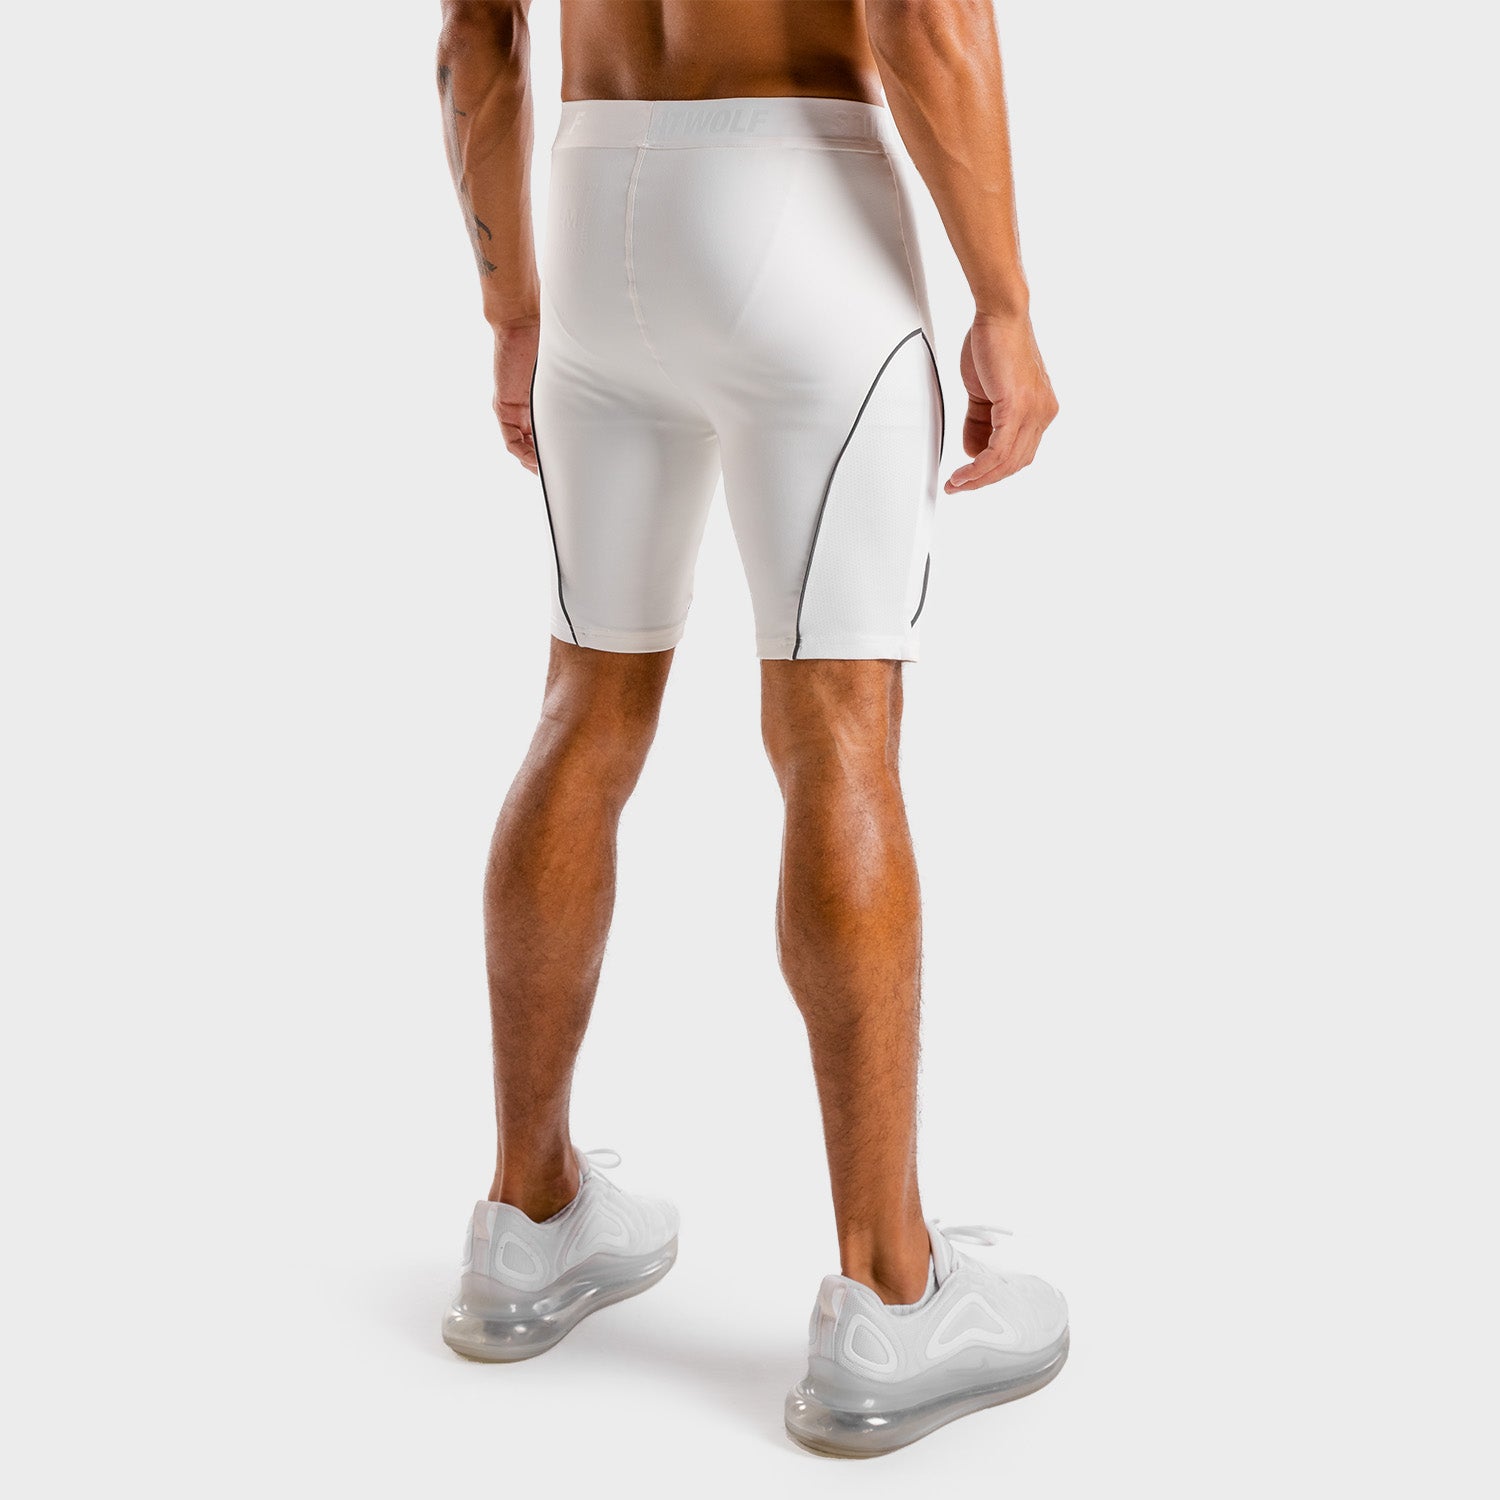 squatwolf-workout-short-for-men-wolf-compression-shorts-white-gym-wear